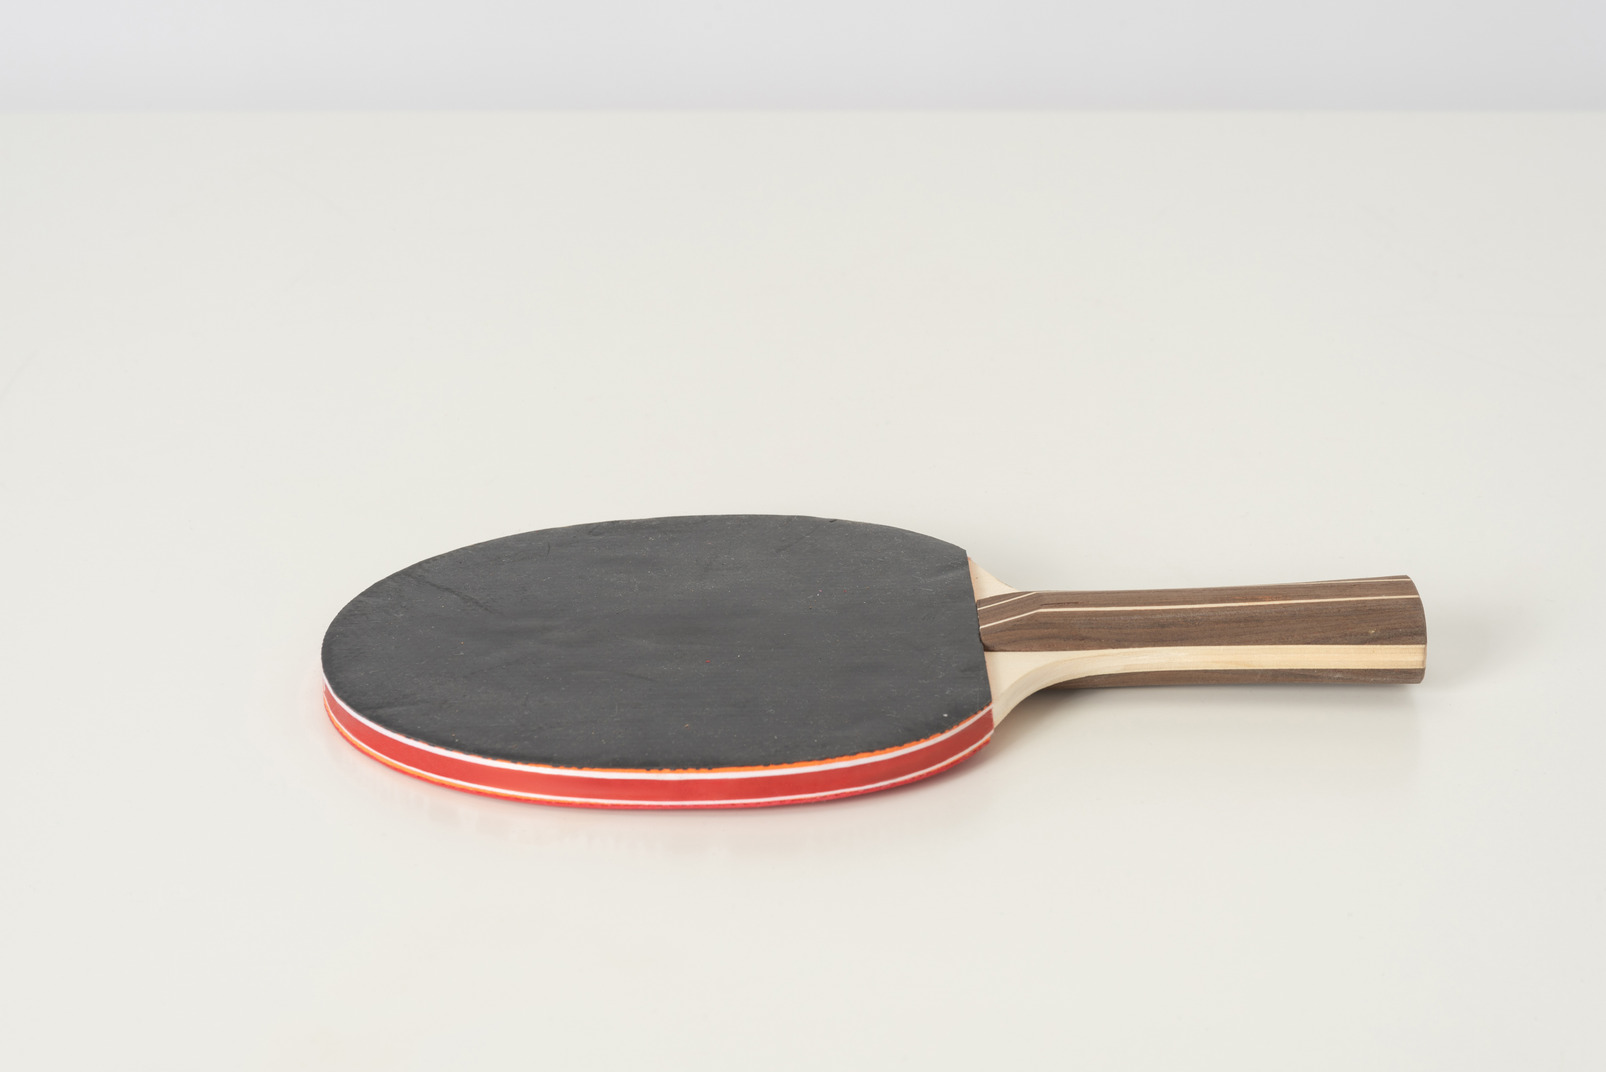 Tennis racket on a white background